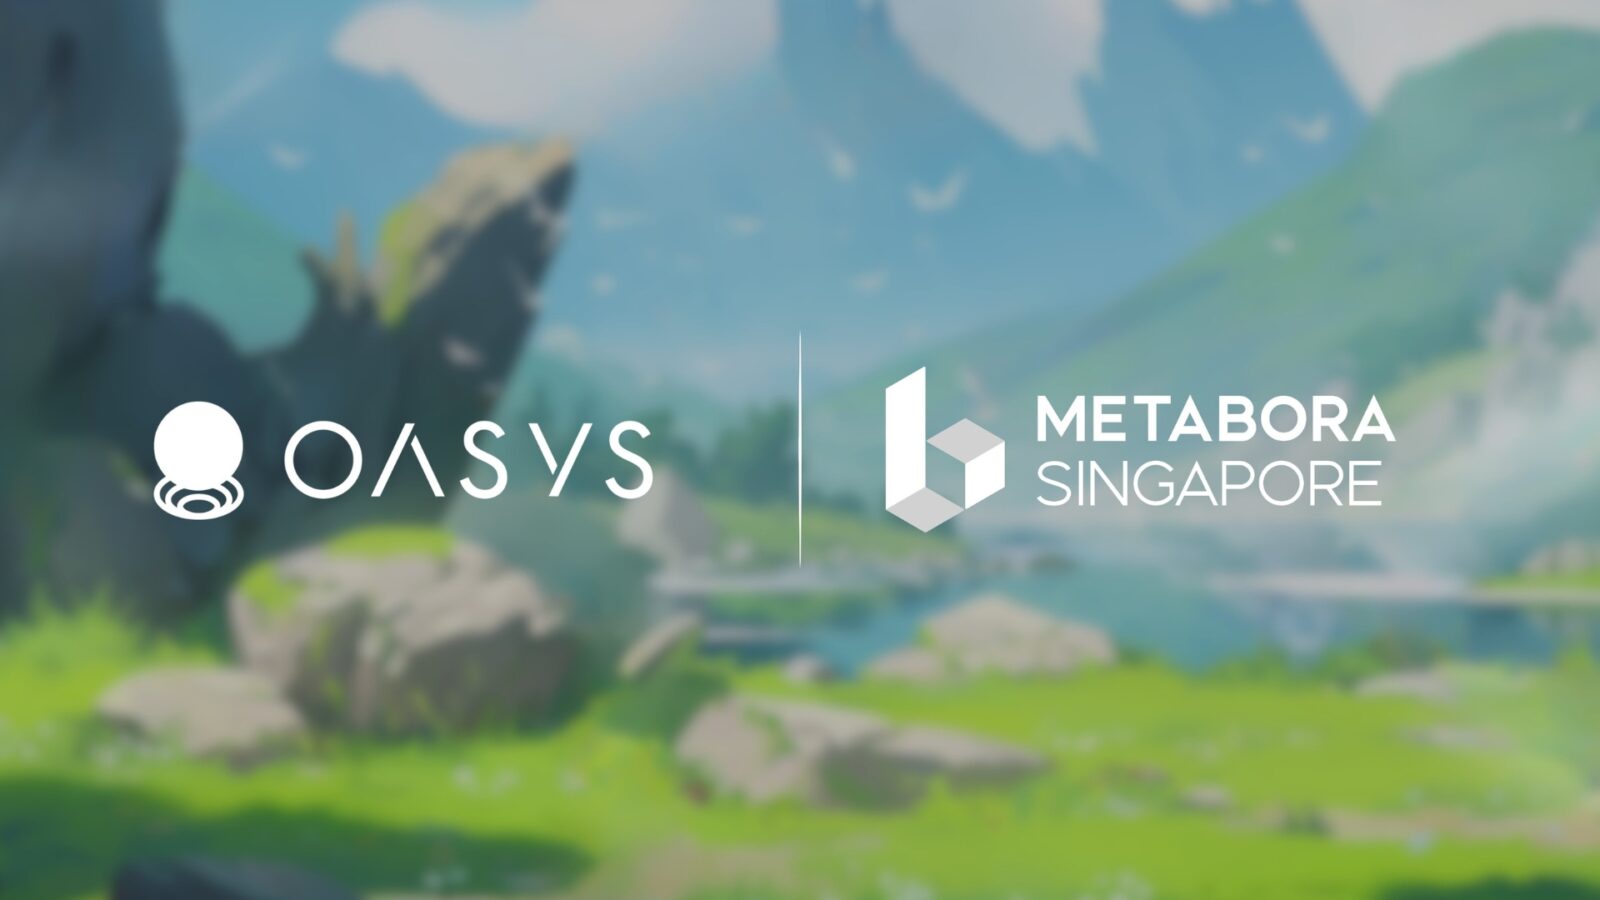 Oasys, a Japanese blockchain company, has announced a partnership with Metabora SG, the Web3 gaming division of South Korea’s internet powerhouse Kakao.